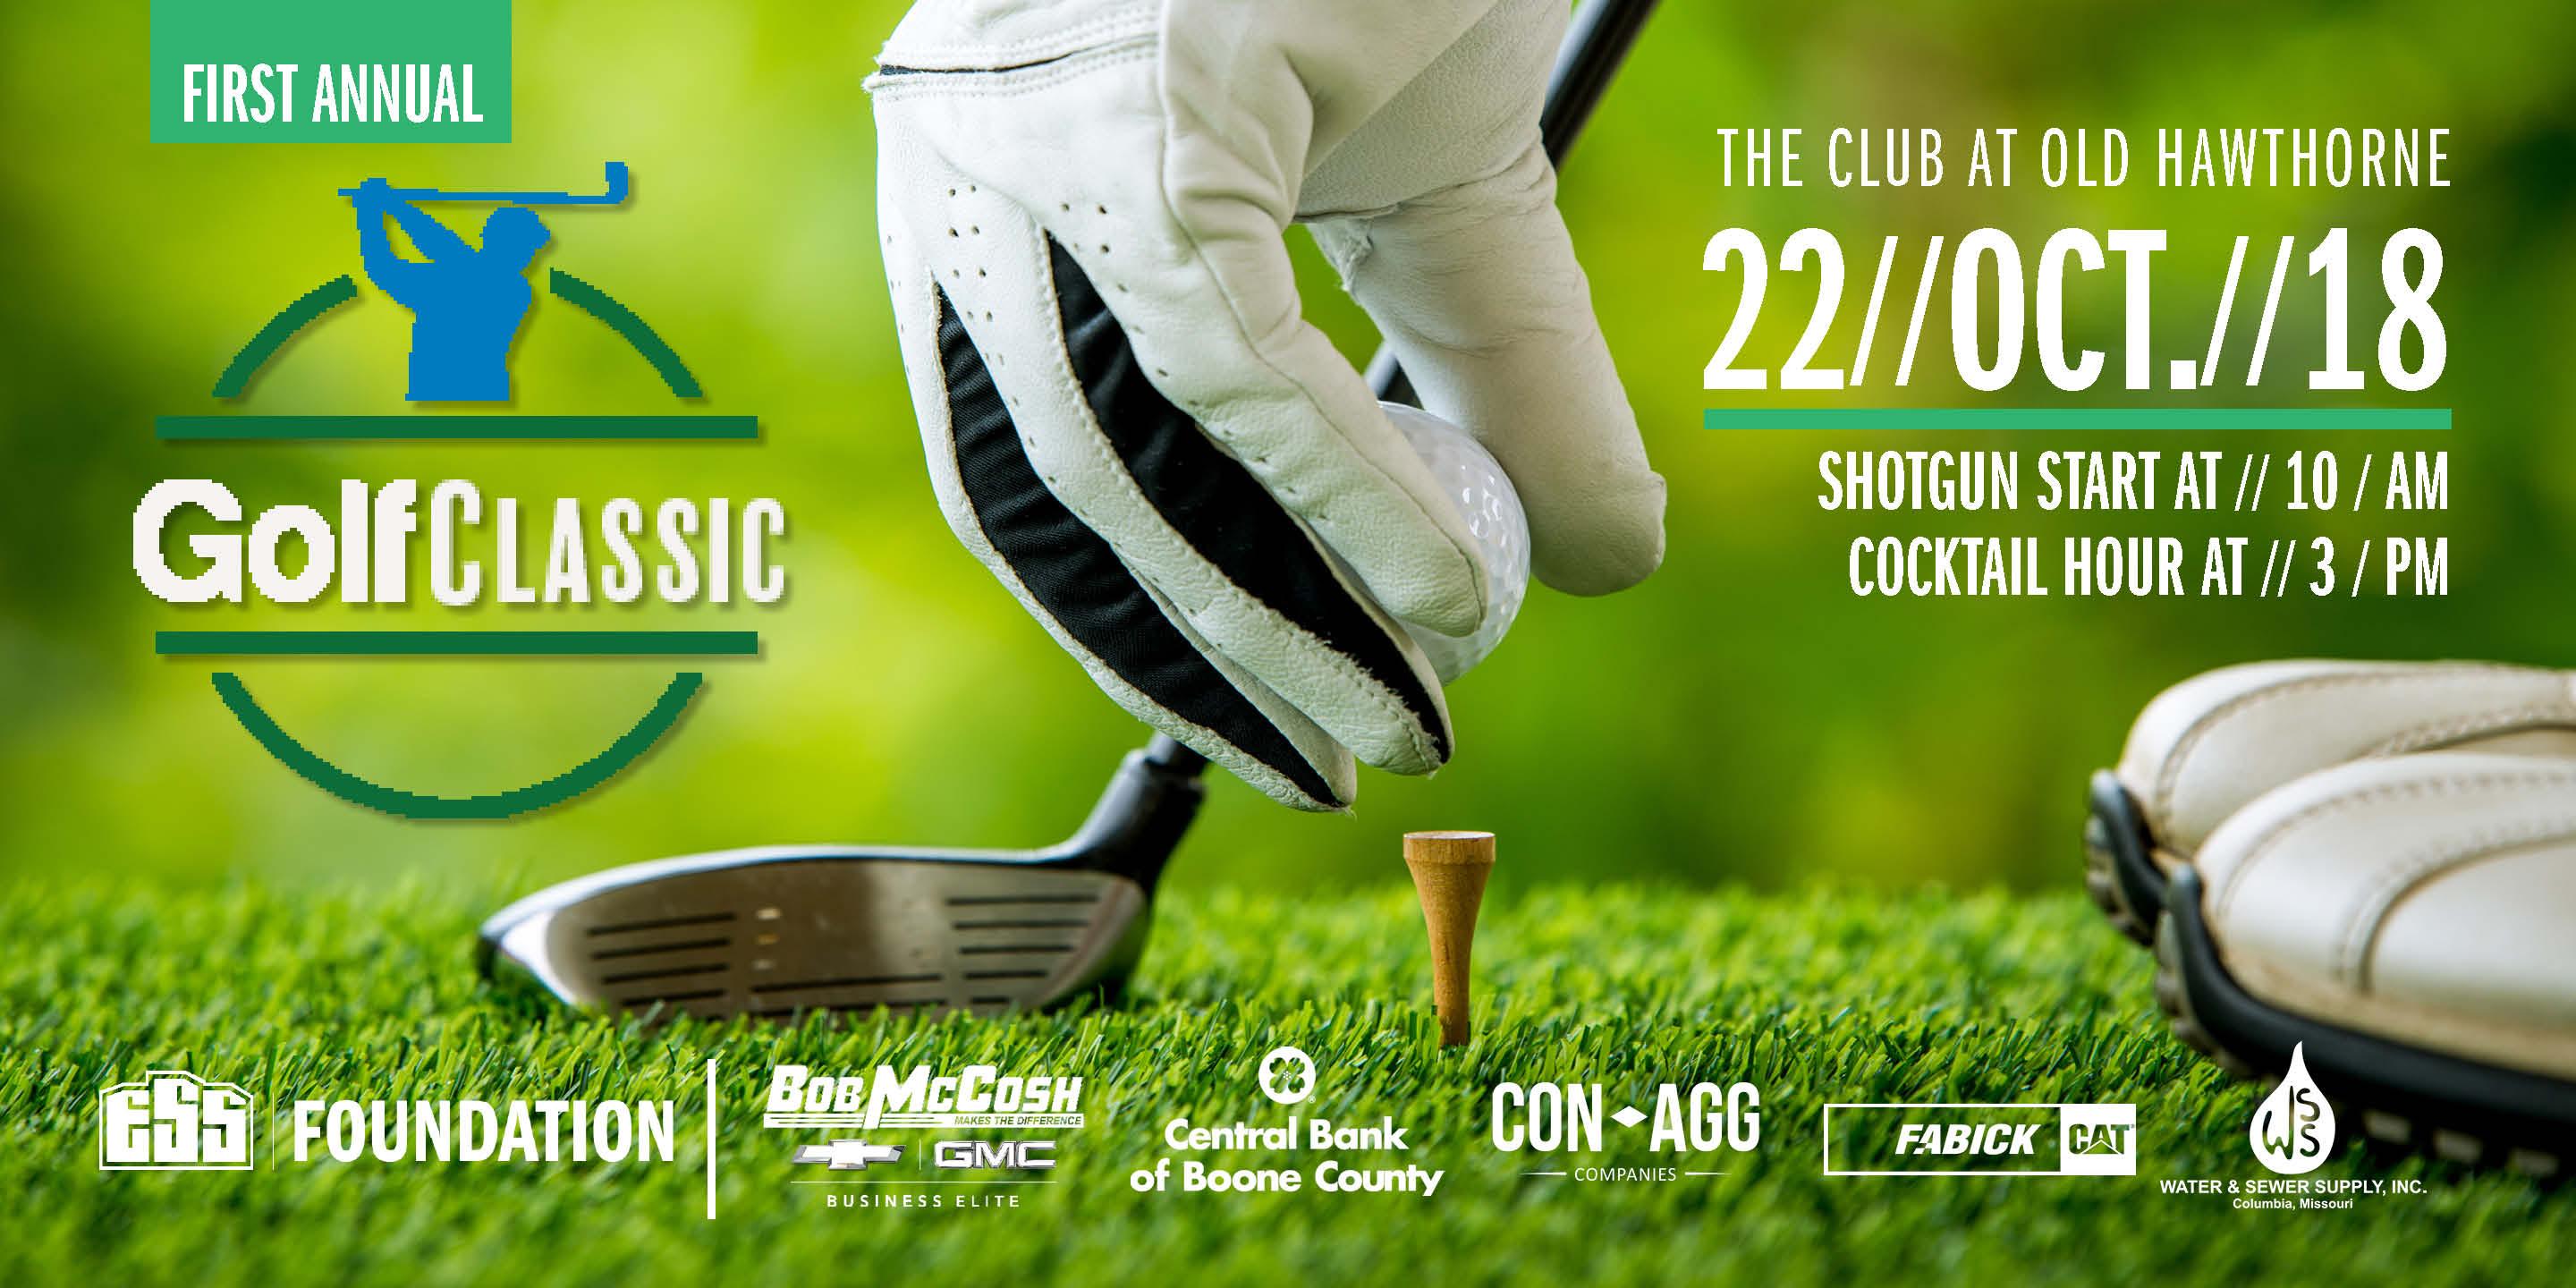 ESS | Foundation's First Annual Golf Classic